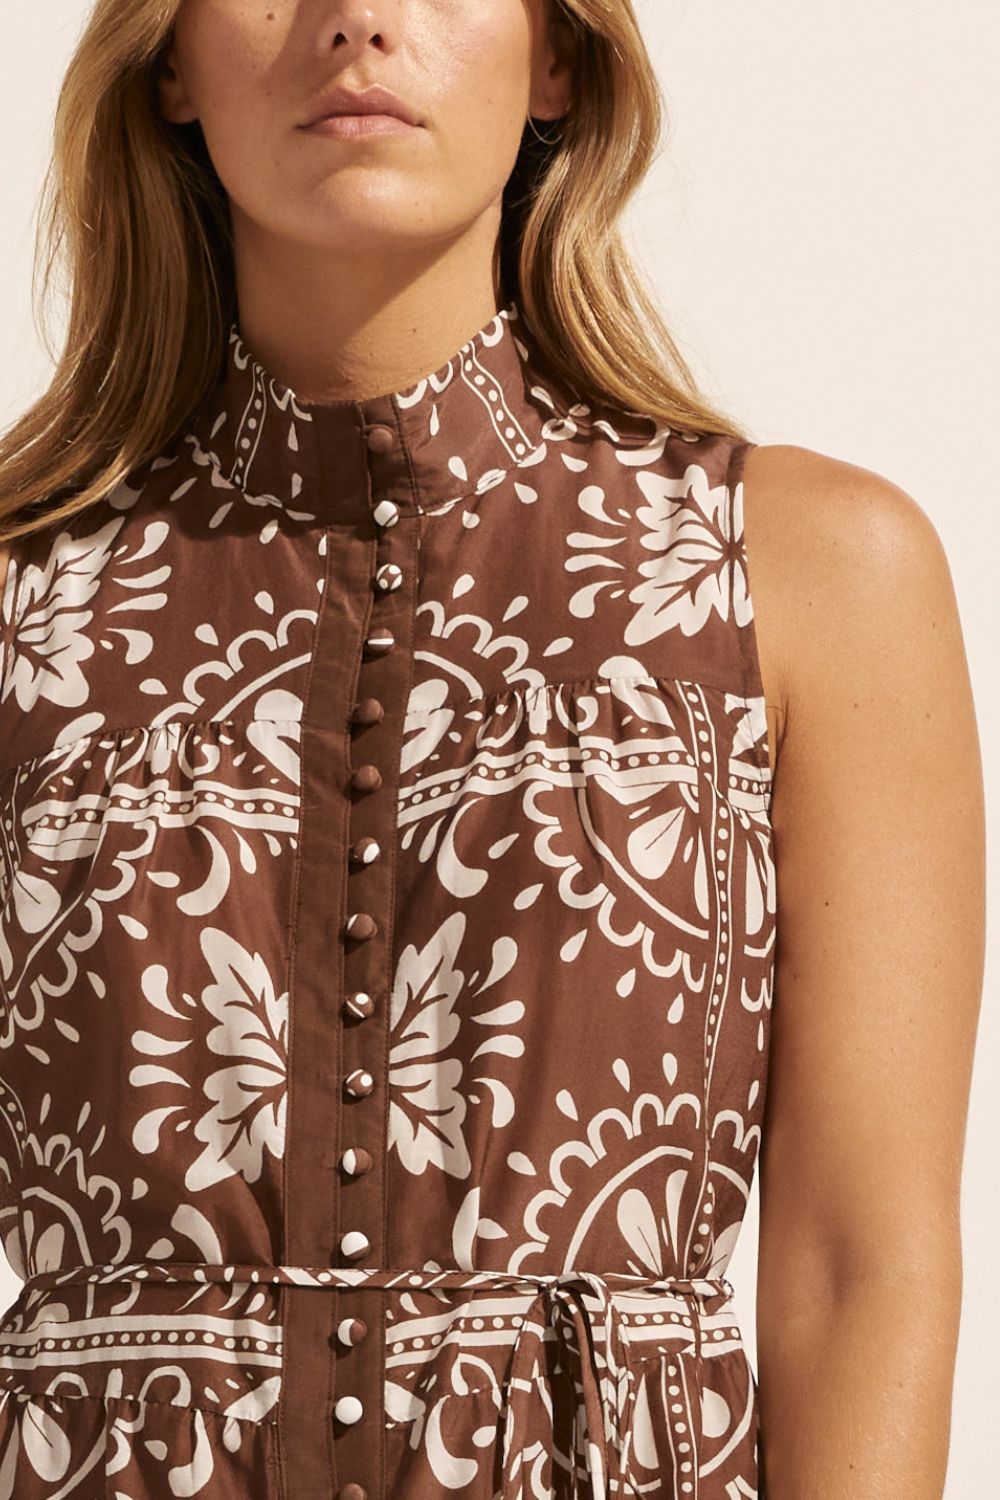 brown and white print, high neck, buttons down centre, thin fabric belt, sleeveless, dress, close up view